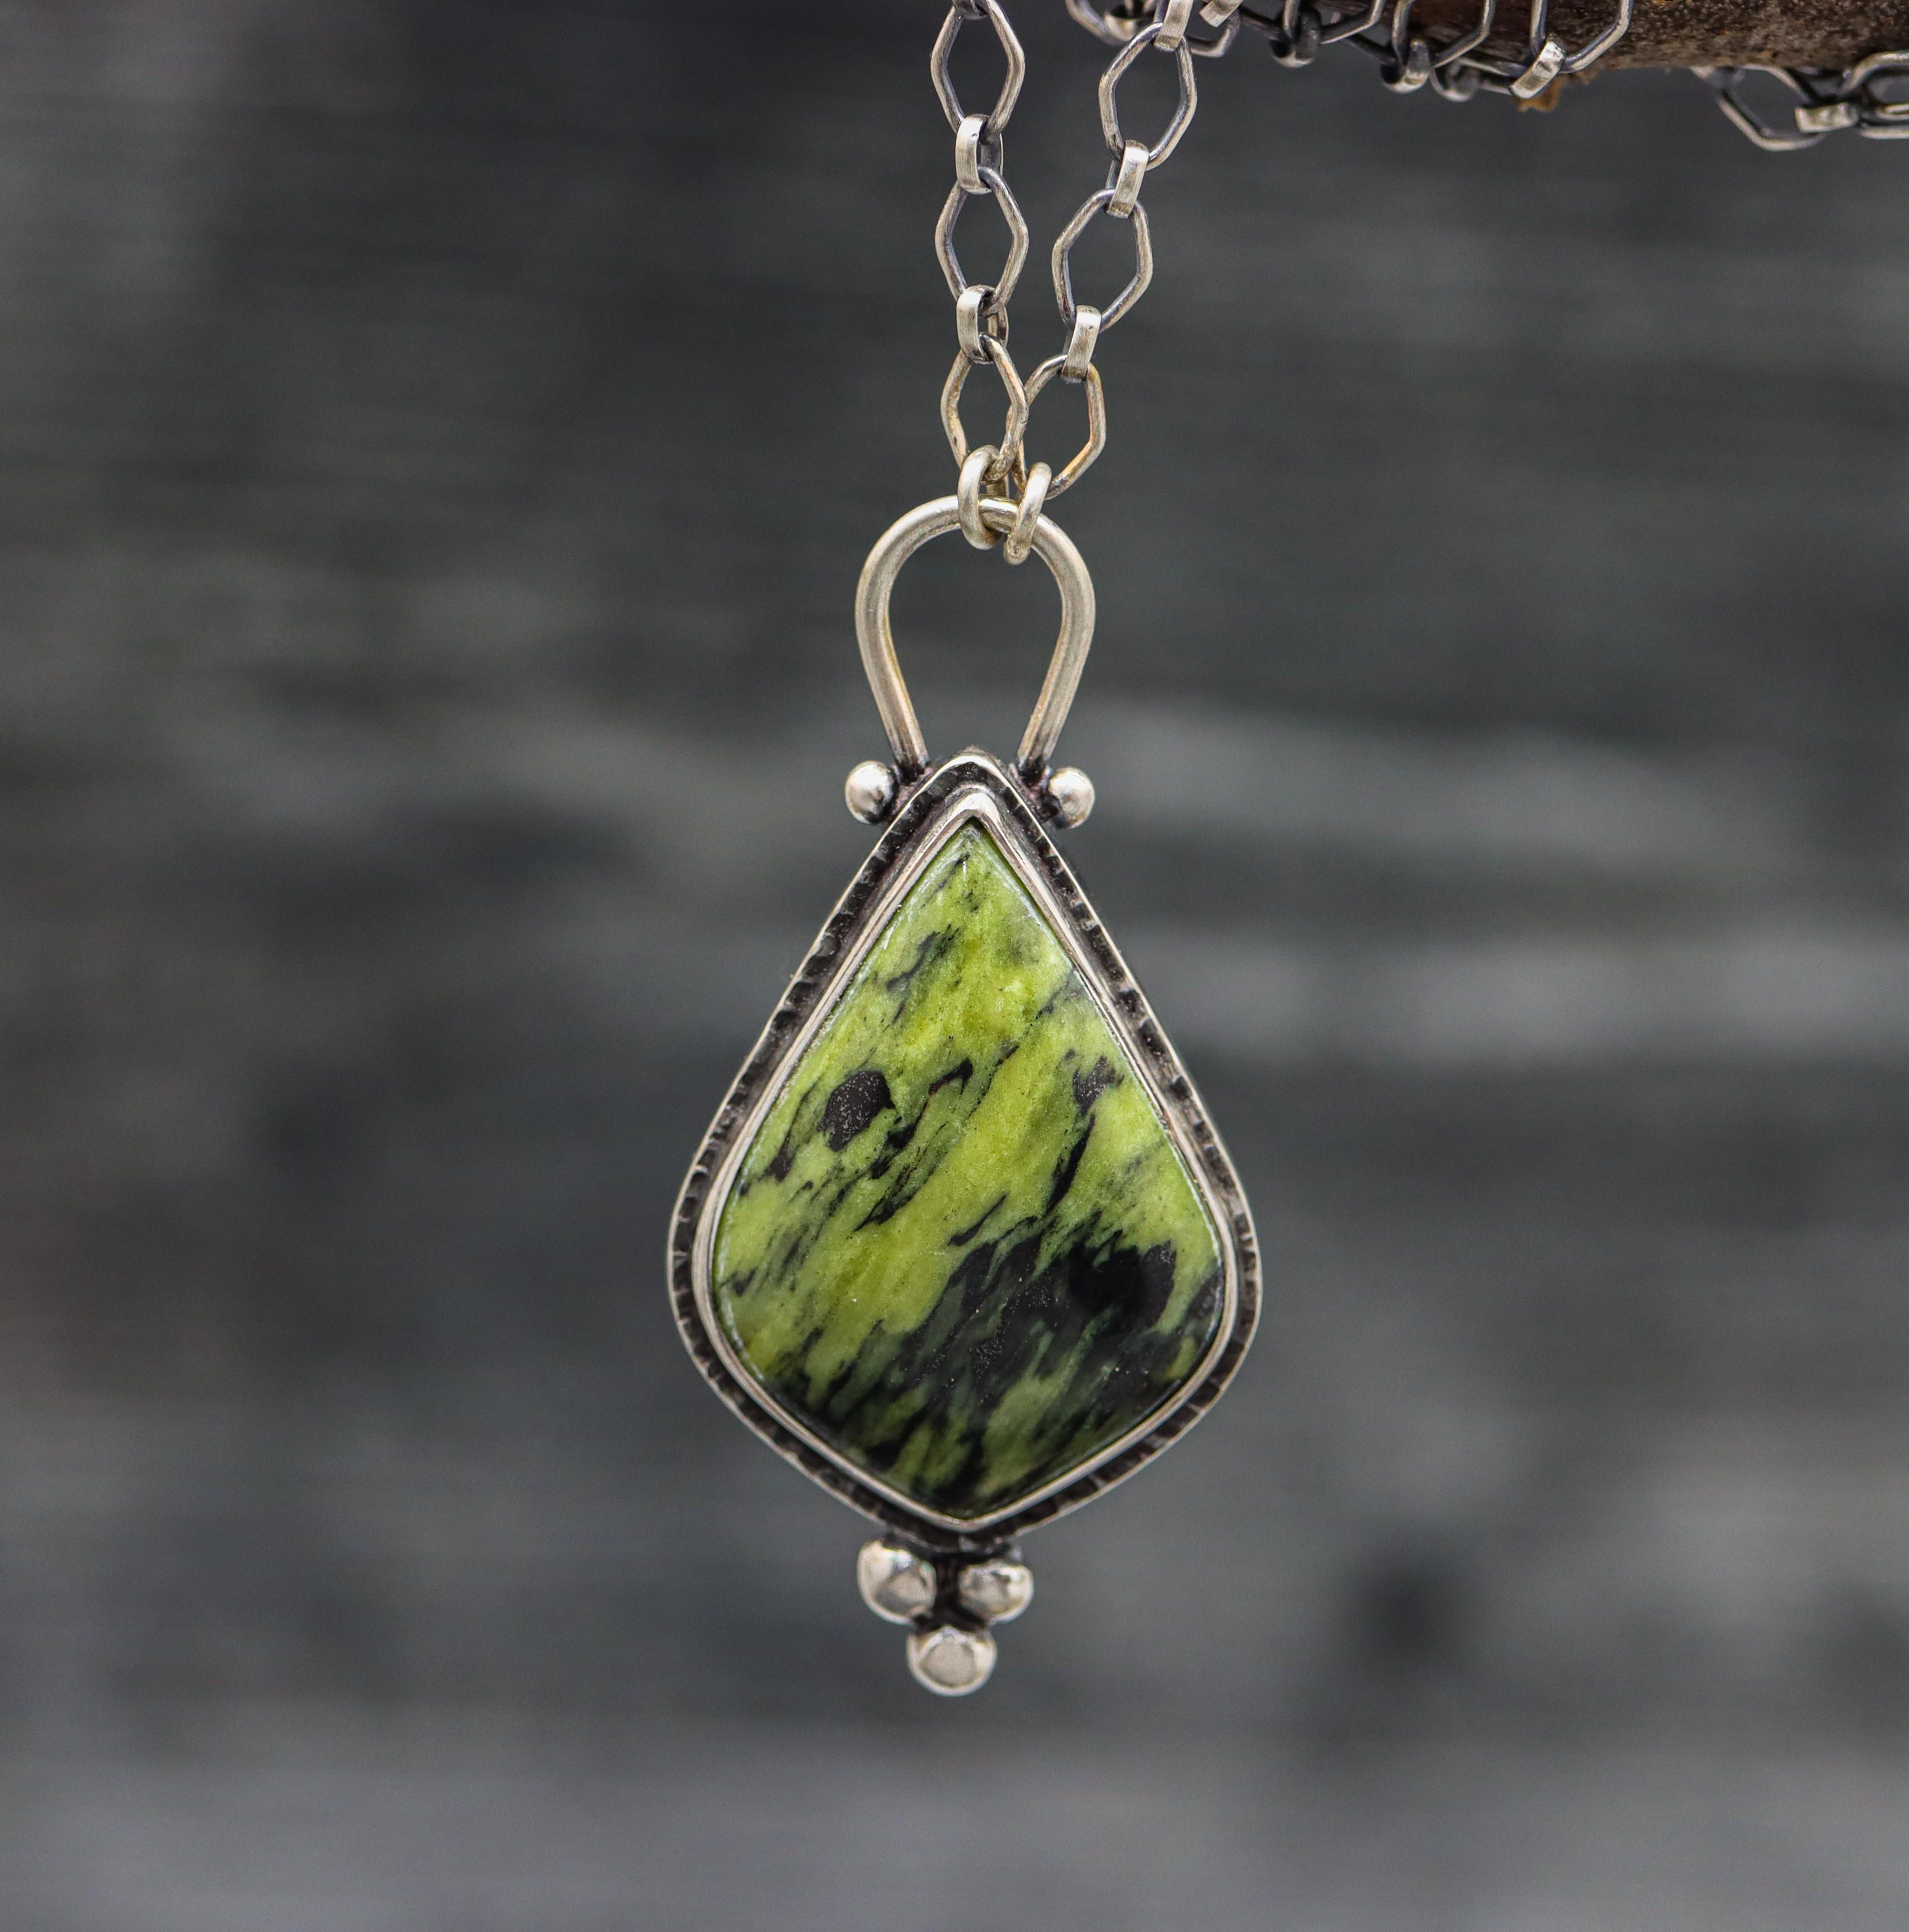 Green Serpentine Pendant Sterling Silver One Of a Kind Gemstone Necklace